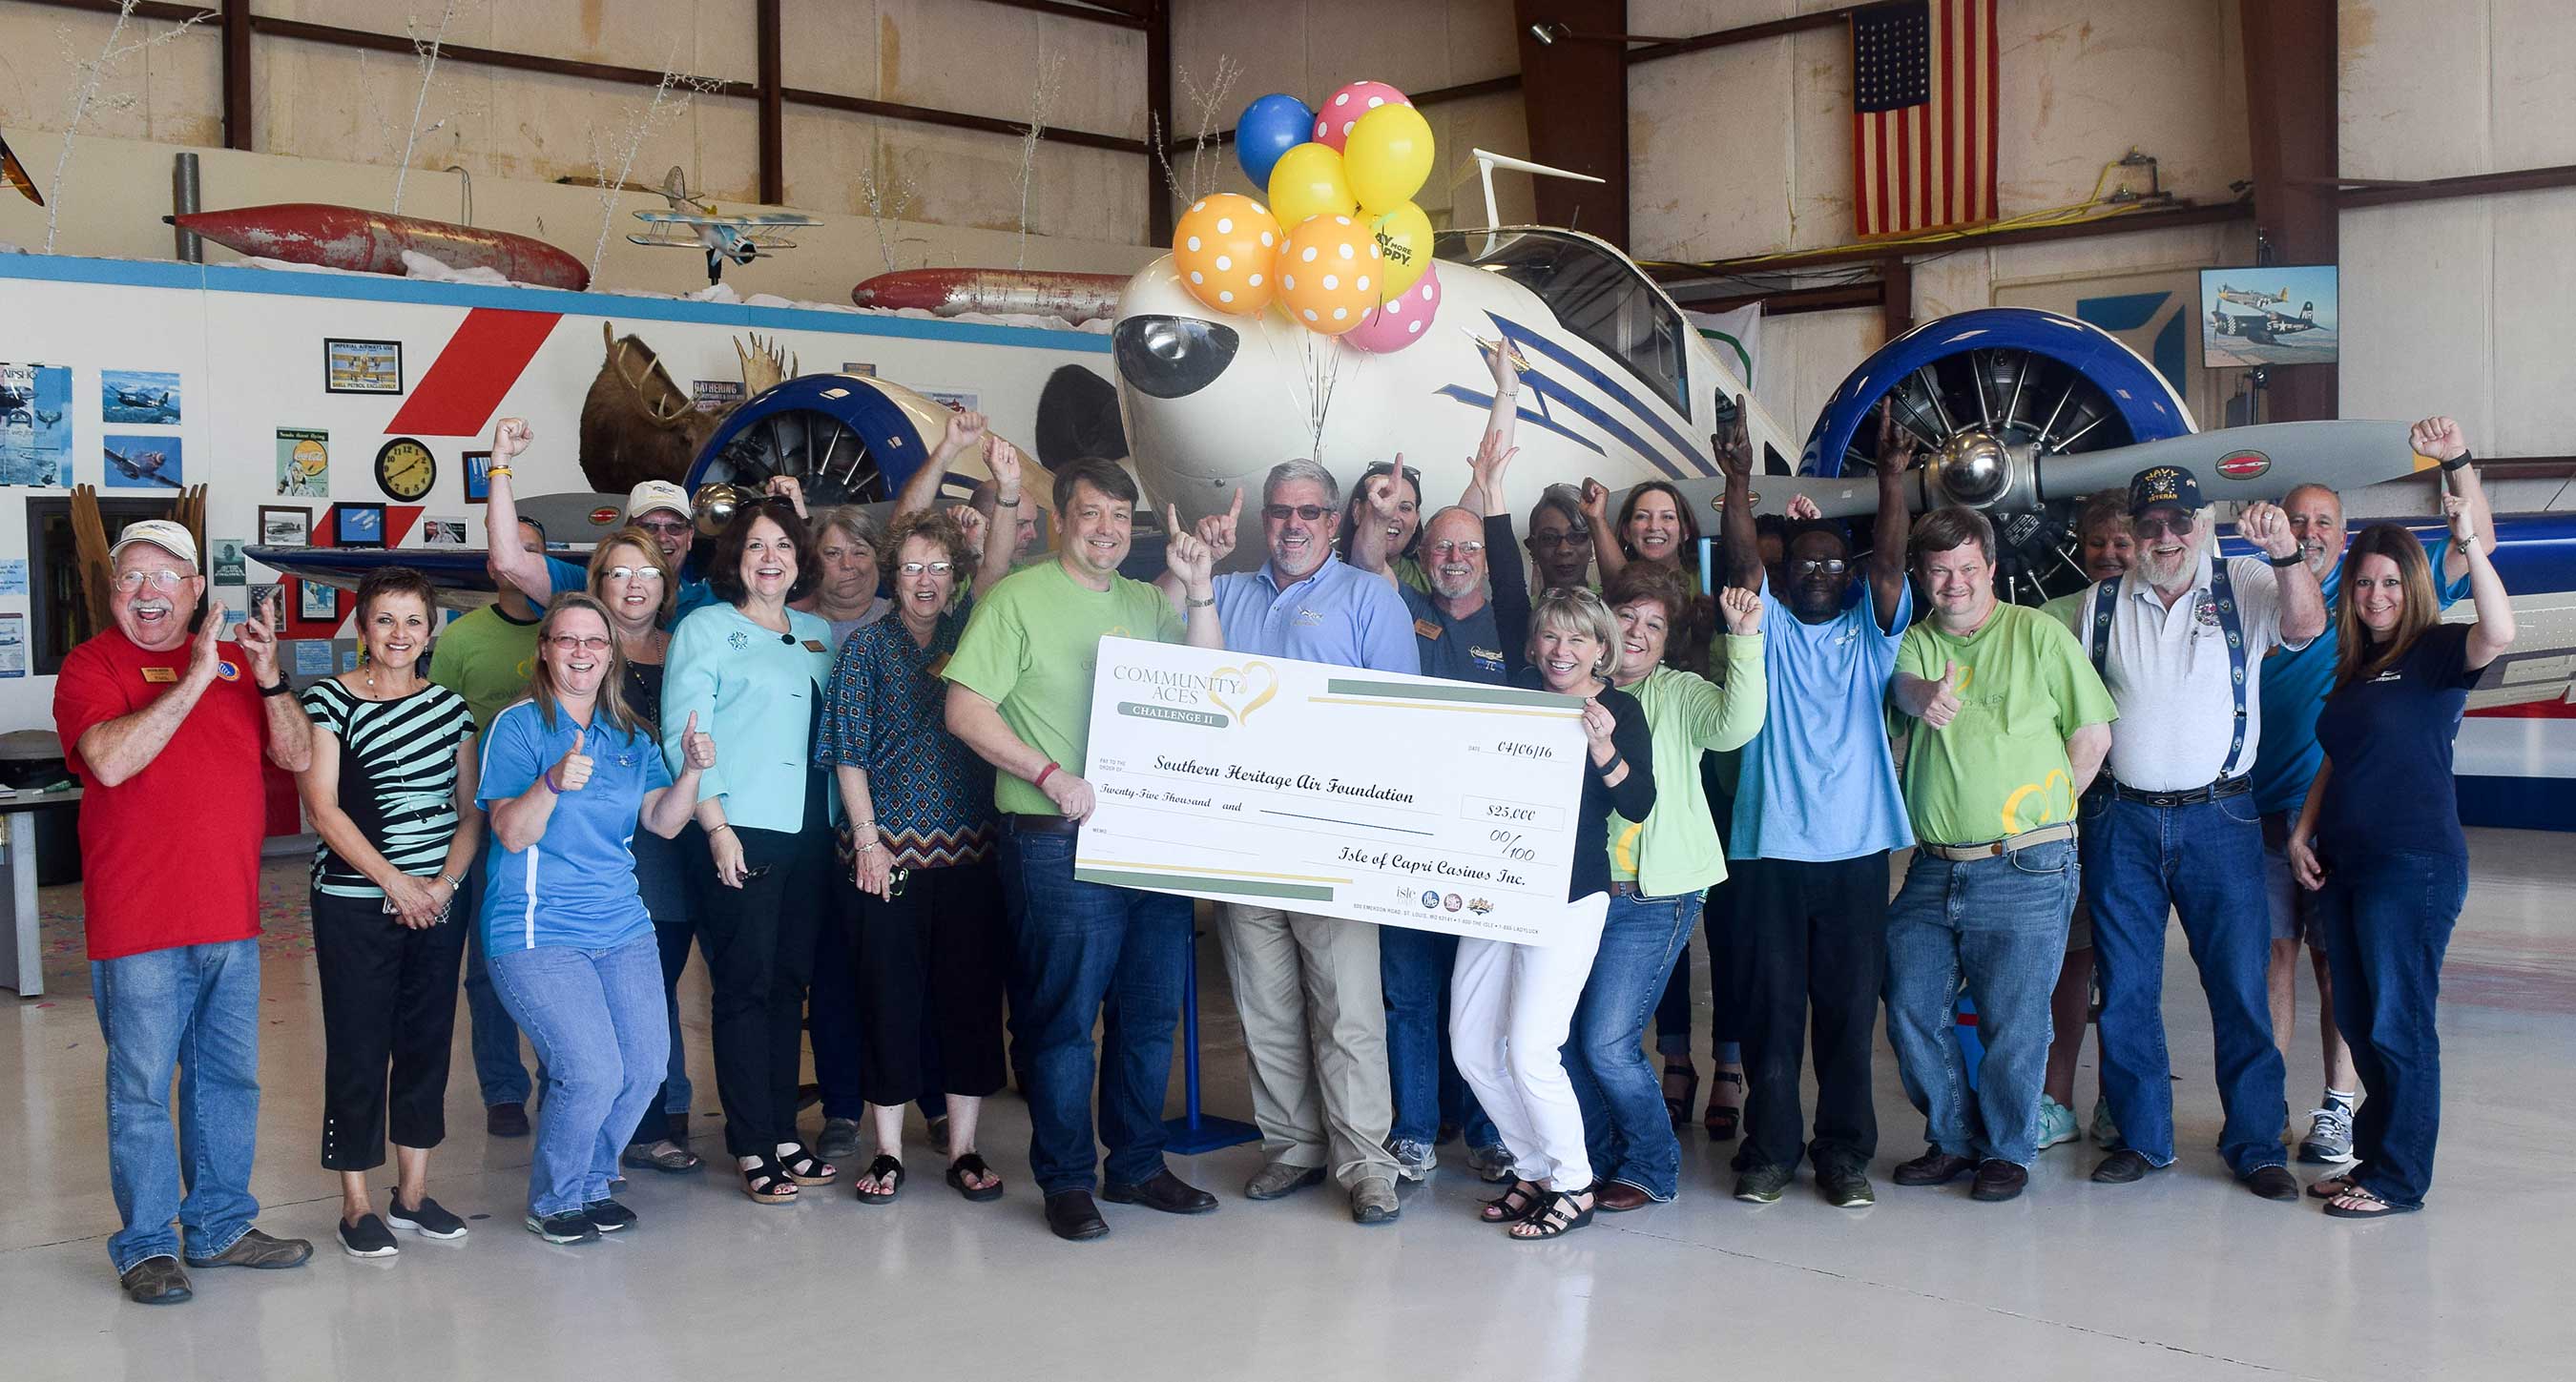 Southern Heritage Air Foundation, based in Tallulah, Louisiana, garnered over 6,000 votes to take home $25,000 in Community Aces Challenge 2